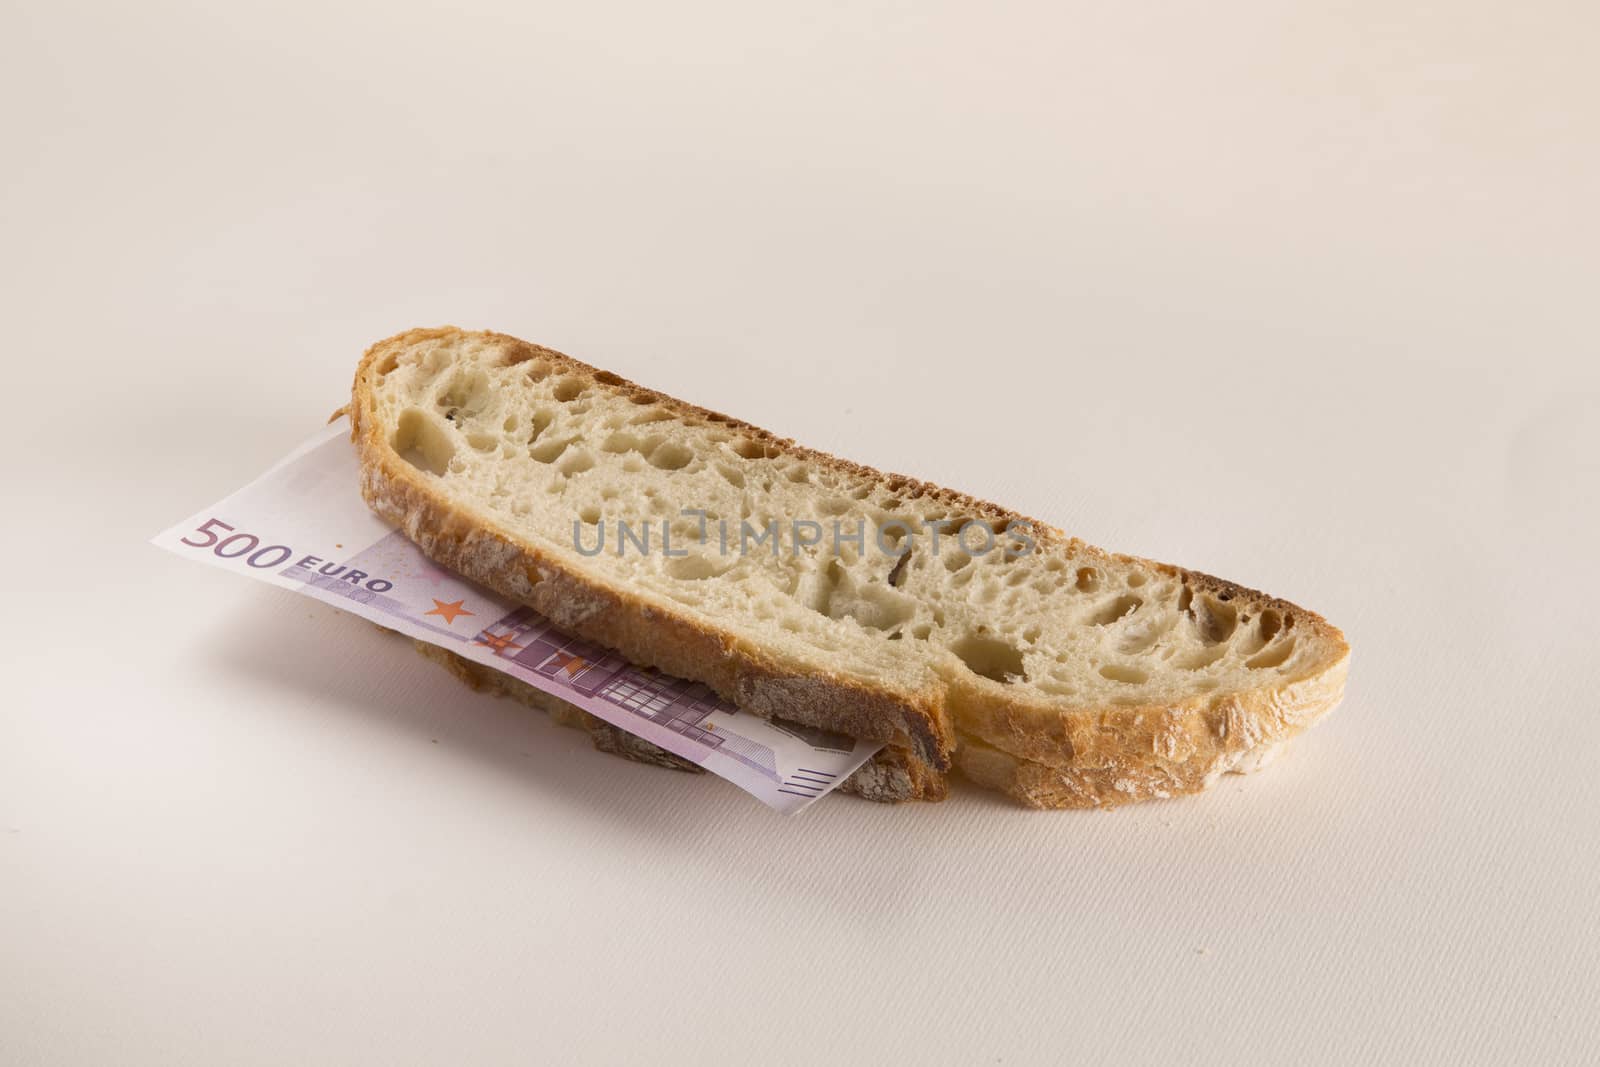 Sandwich with 500 euros banknote